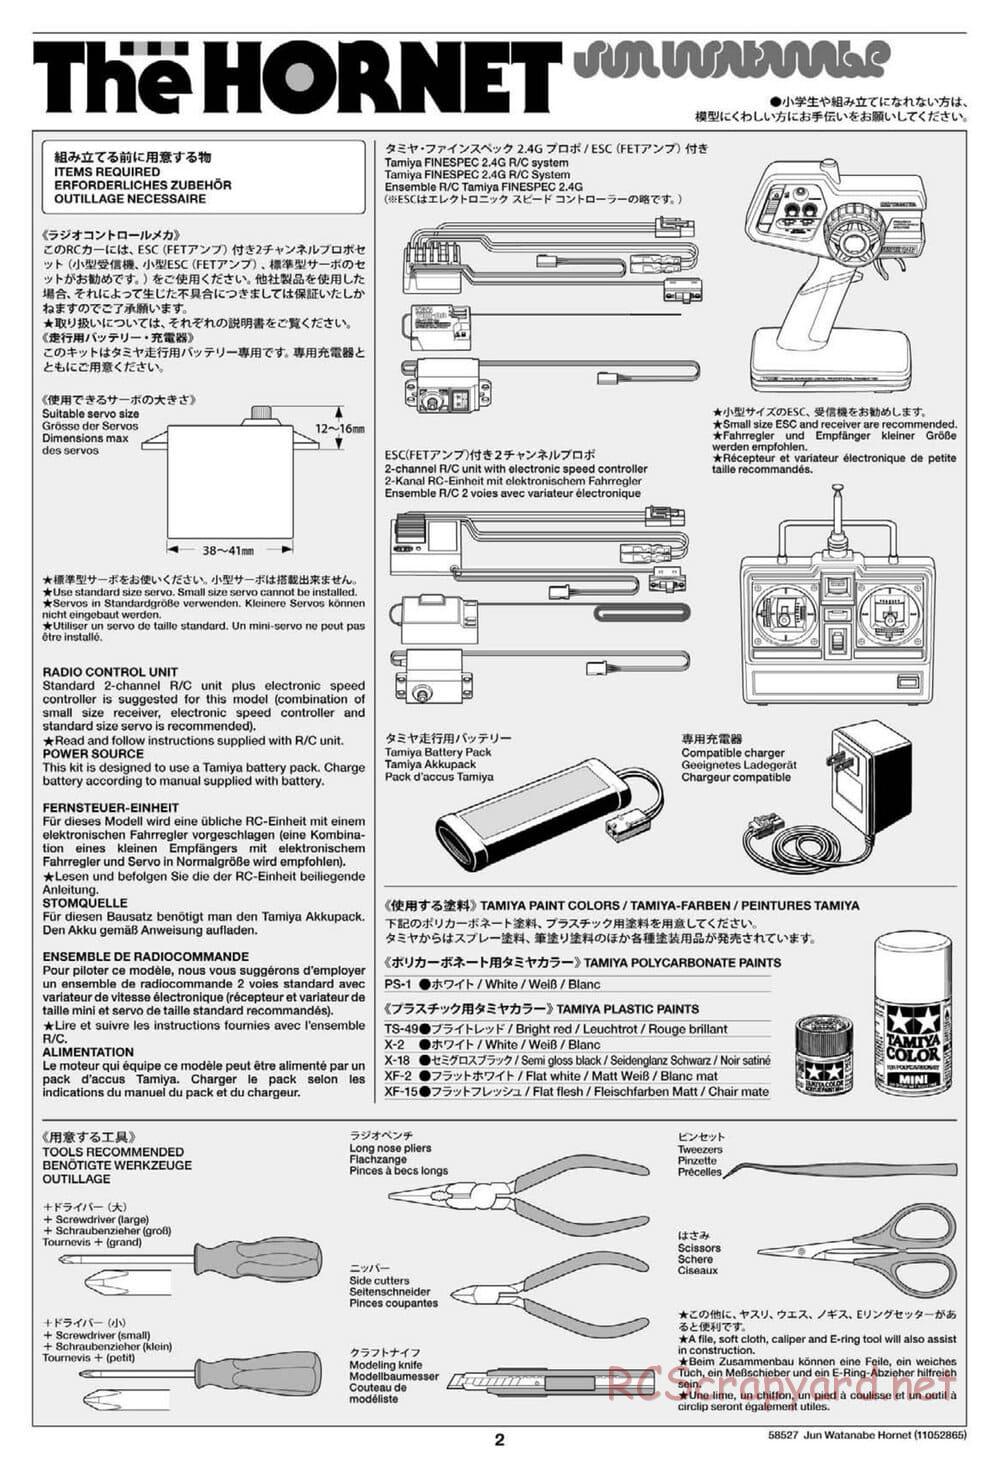 Tamiya - The Hornet by Jun Watanabe - GH Chassis - Manual - Page 2